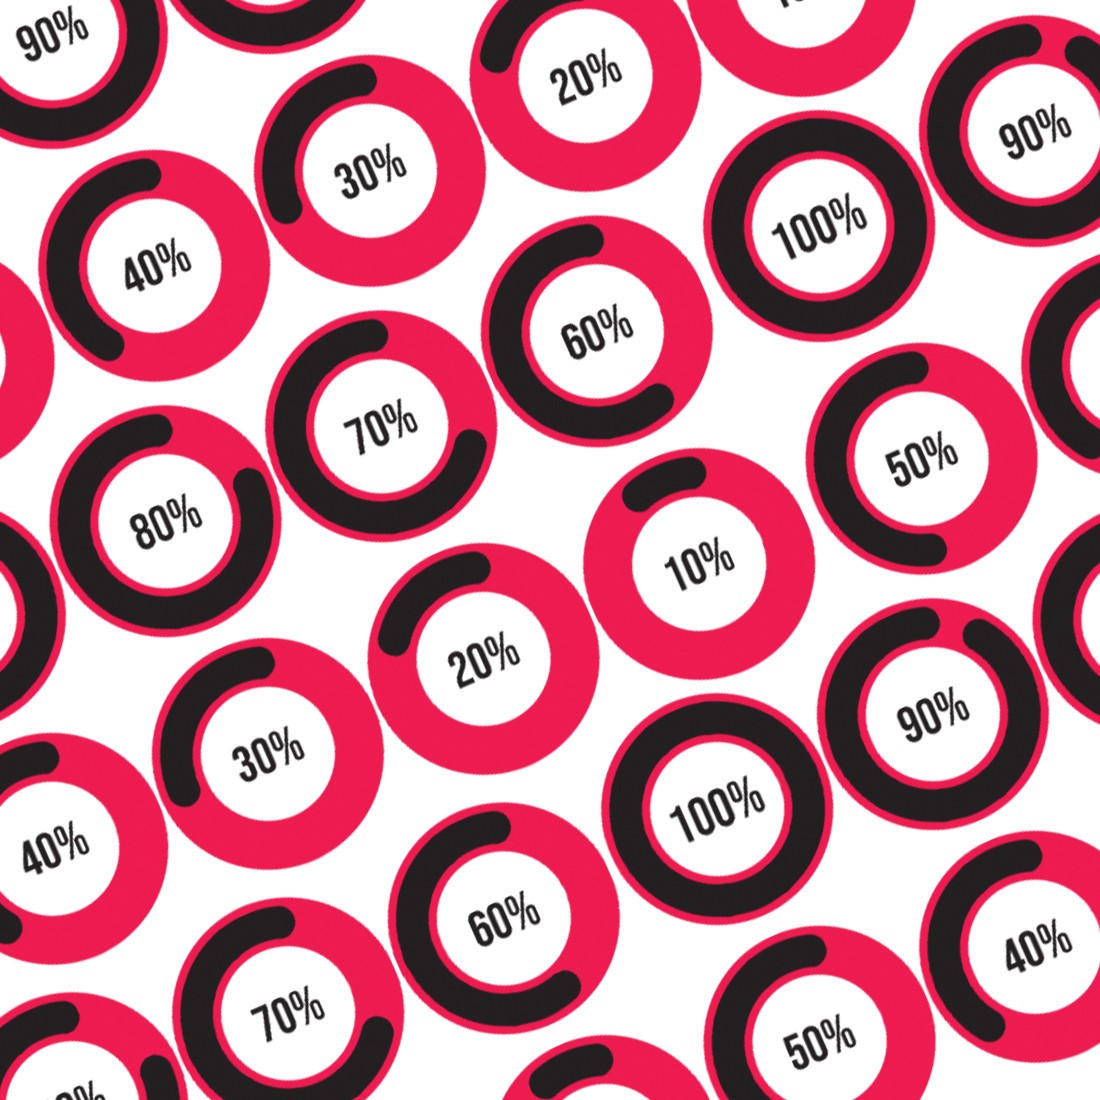 Infographic Circular Percentage Completion Button red.